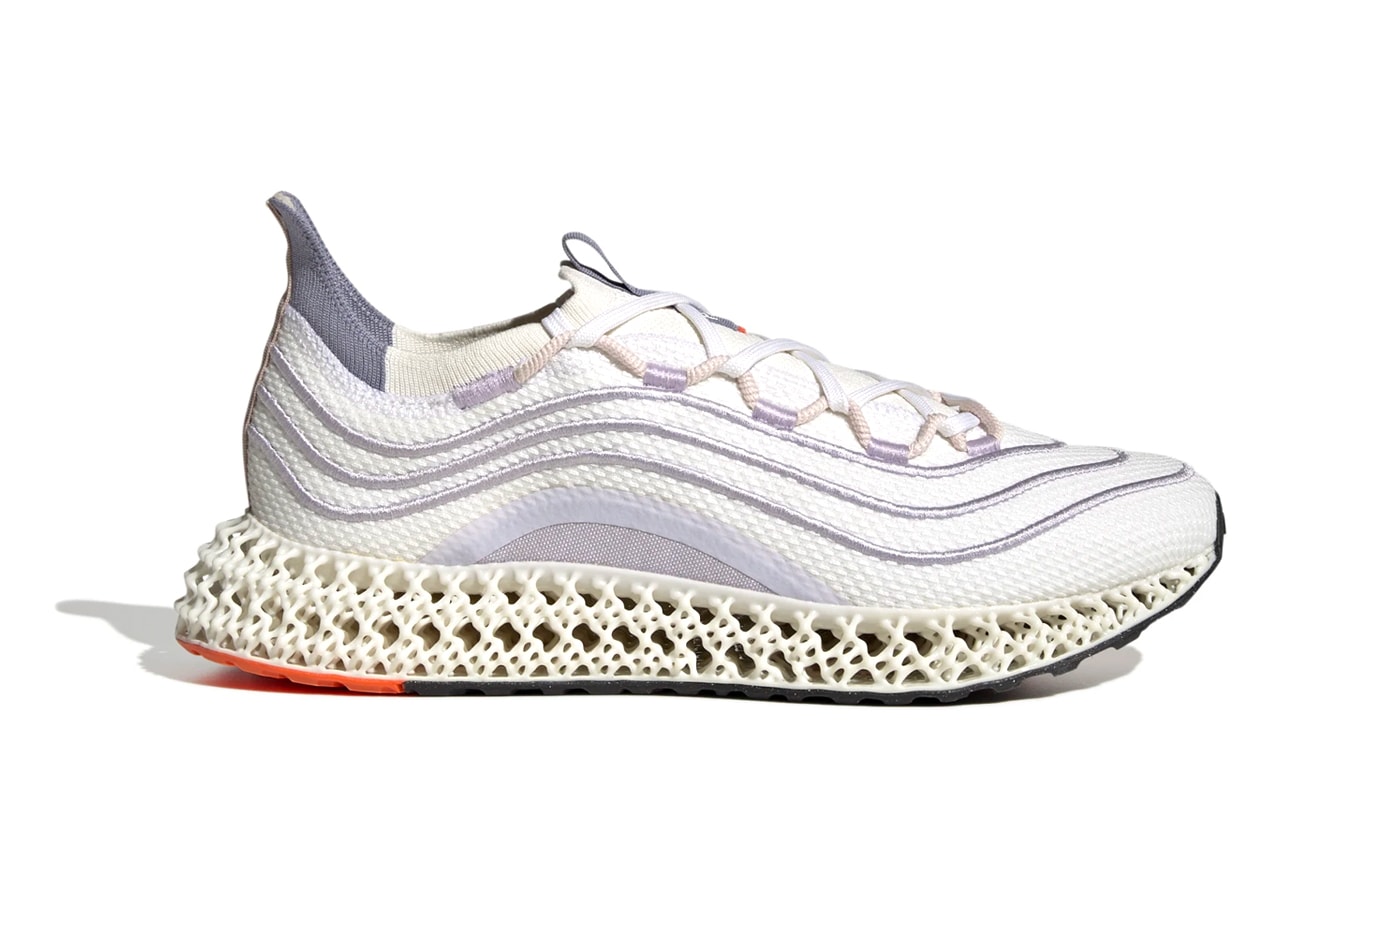 adidas 4dfwd parley for the oceans running shoes gv9056 GX9806 white silver violet impact orange black carbon grey release info date price